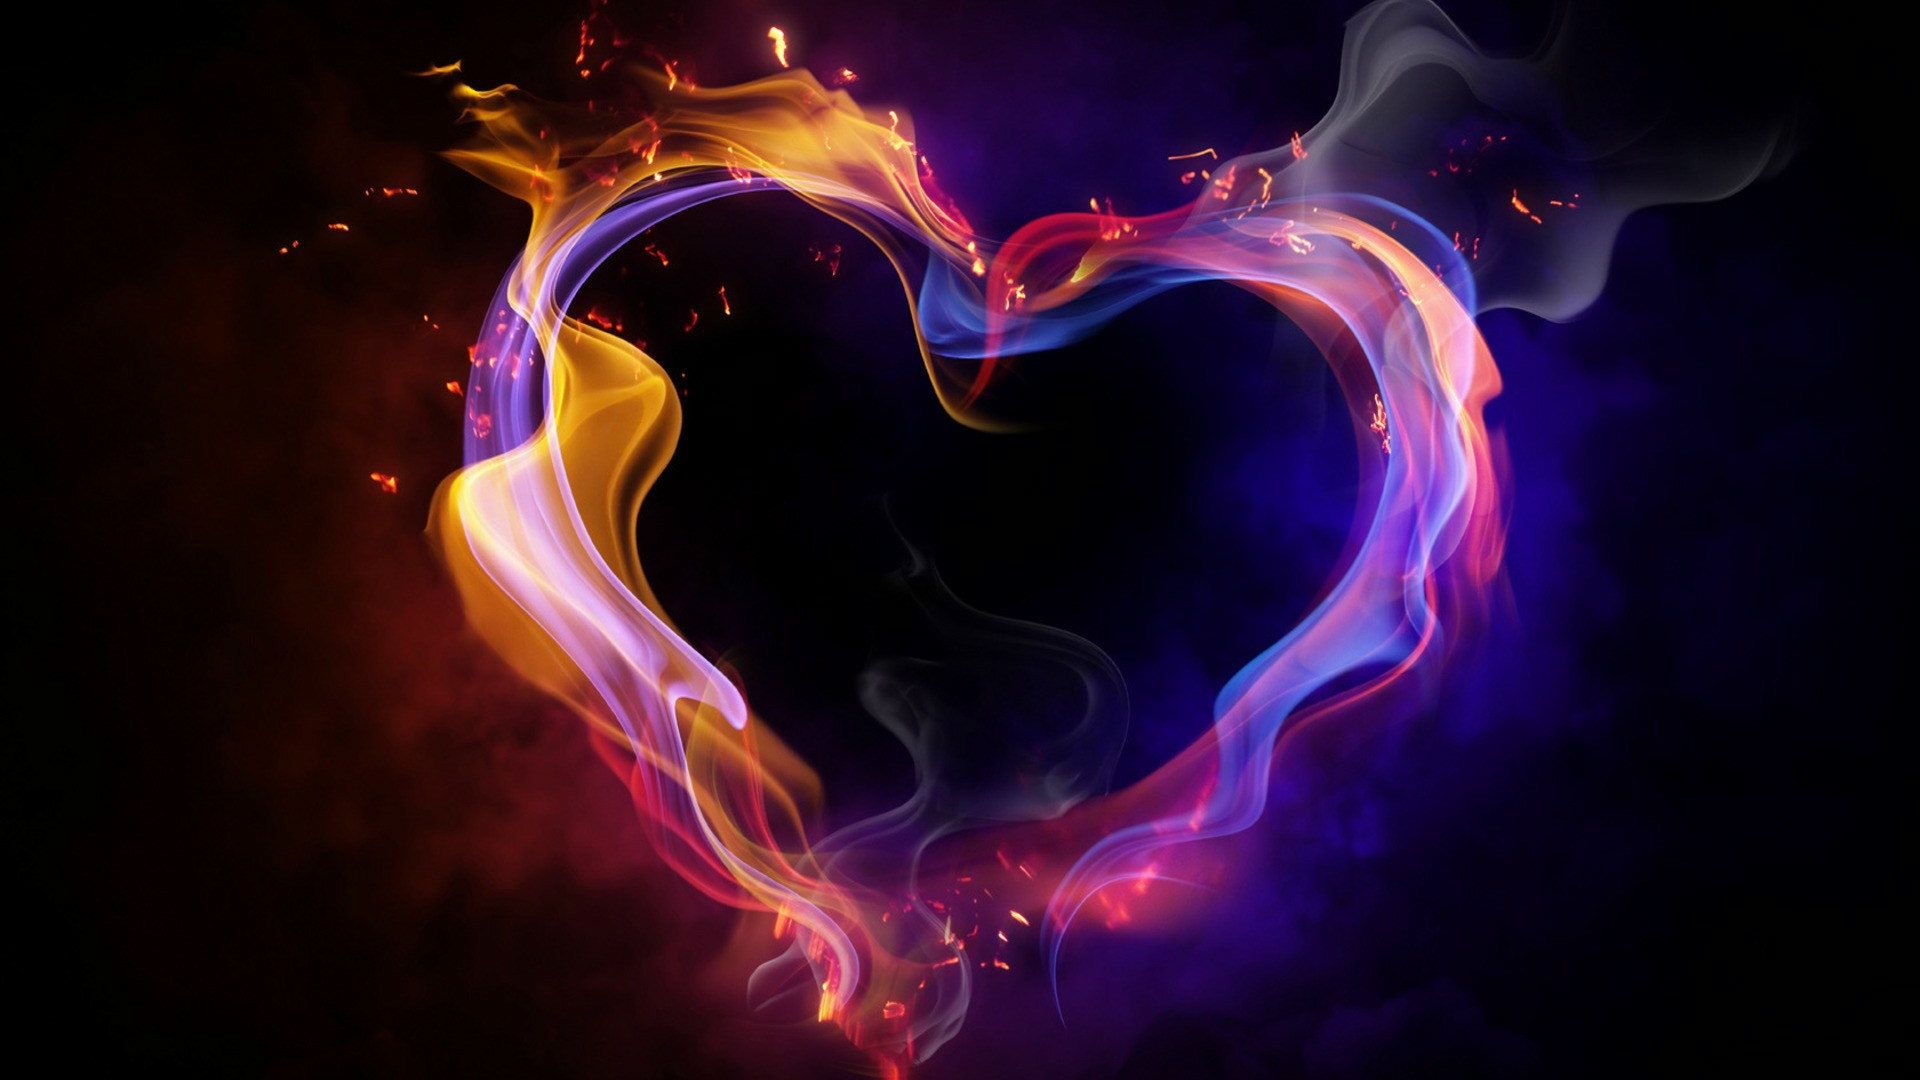 Awesome Heart Background wallpaper | 1920x1080 | #8136